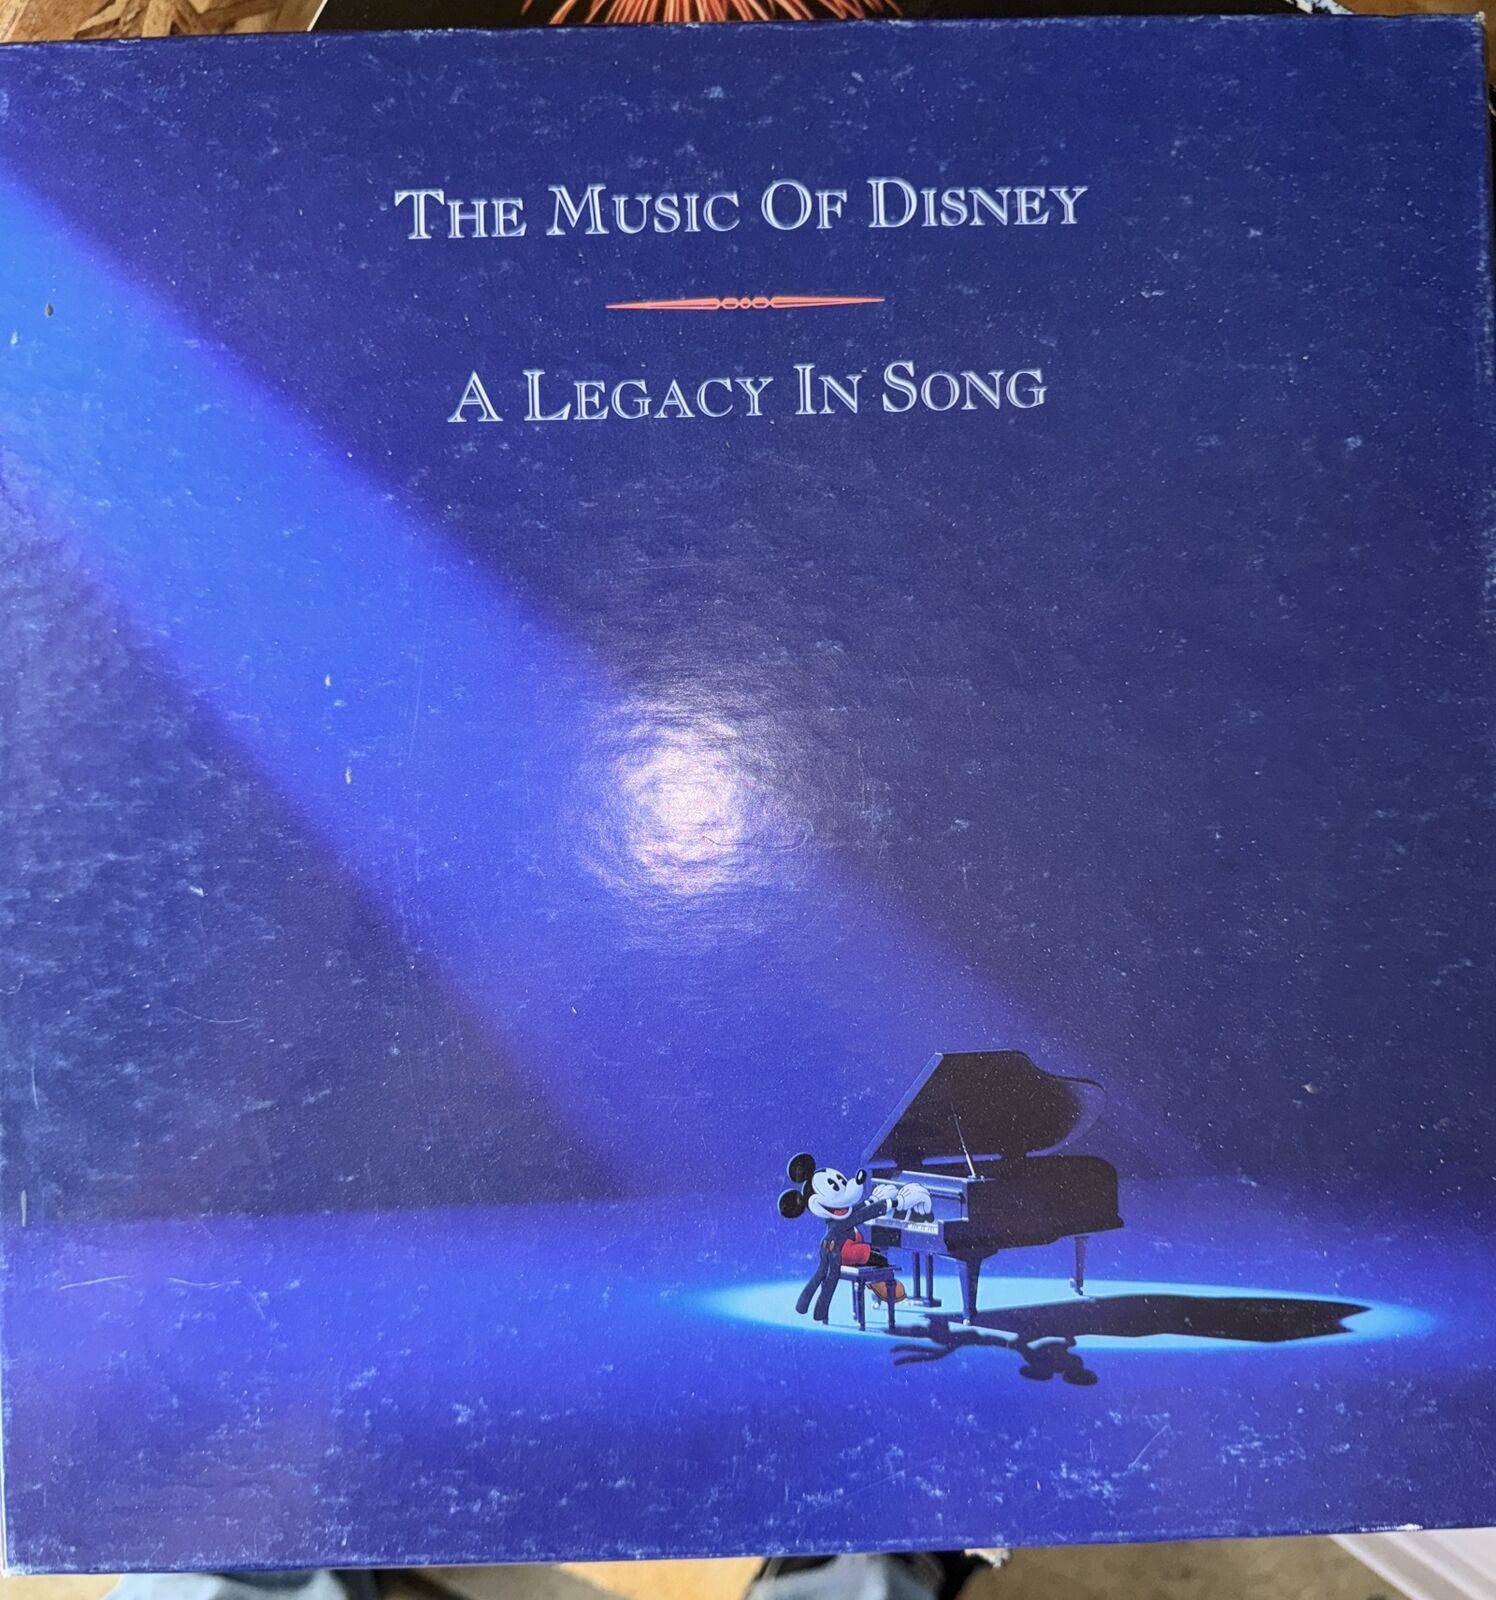 The Music of Disney: A Legacy in Song [Box] by Disney (CD, 3 Discs)